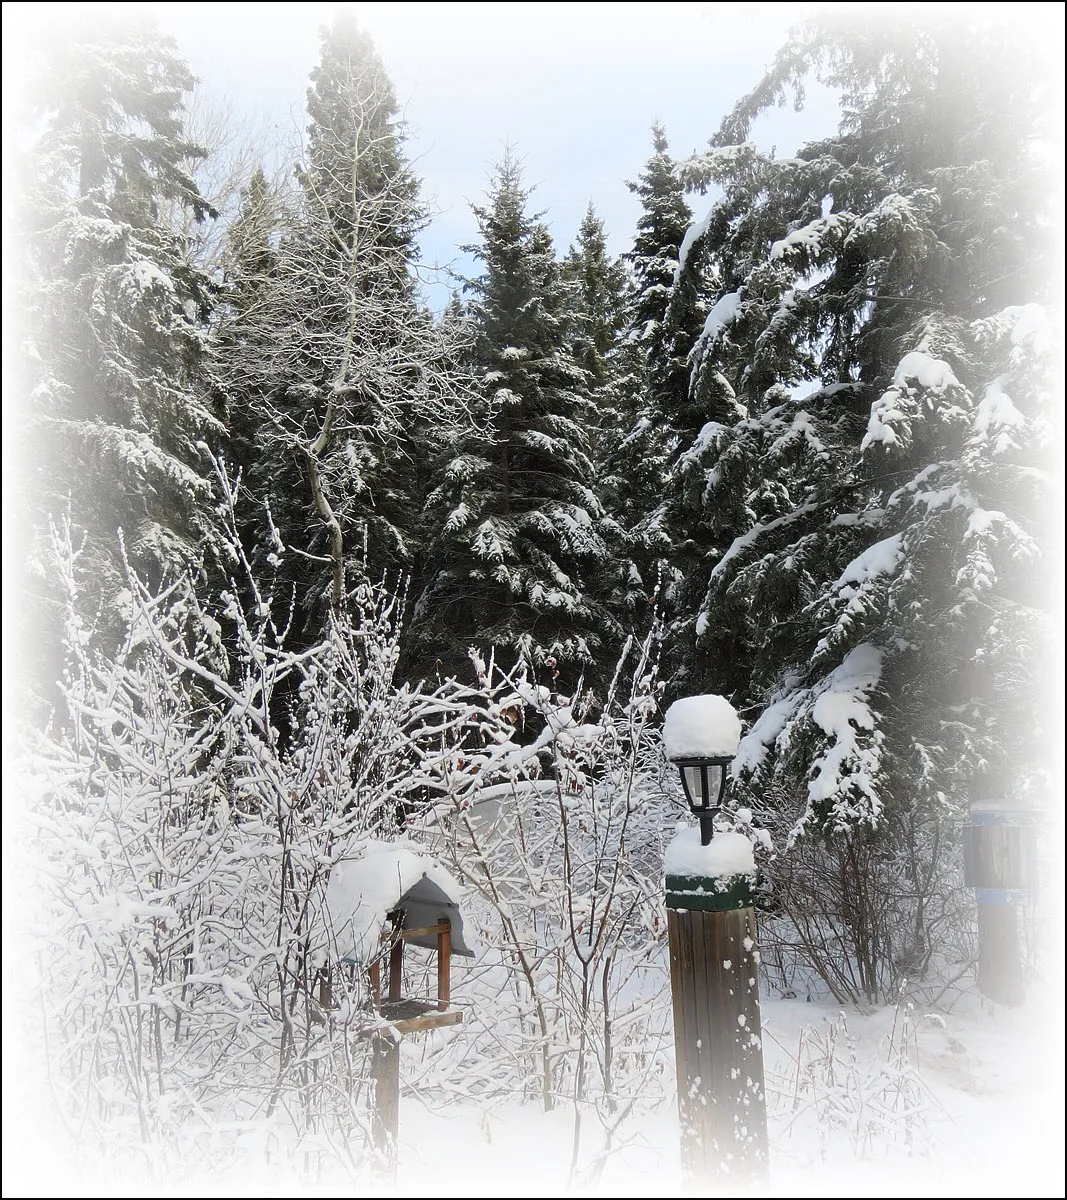 frosted scene of snow on trees and bushes by feeder.JPG